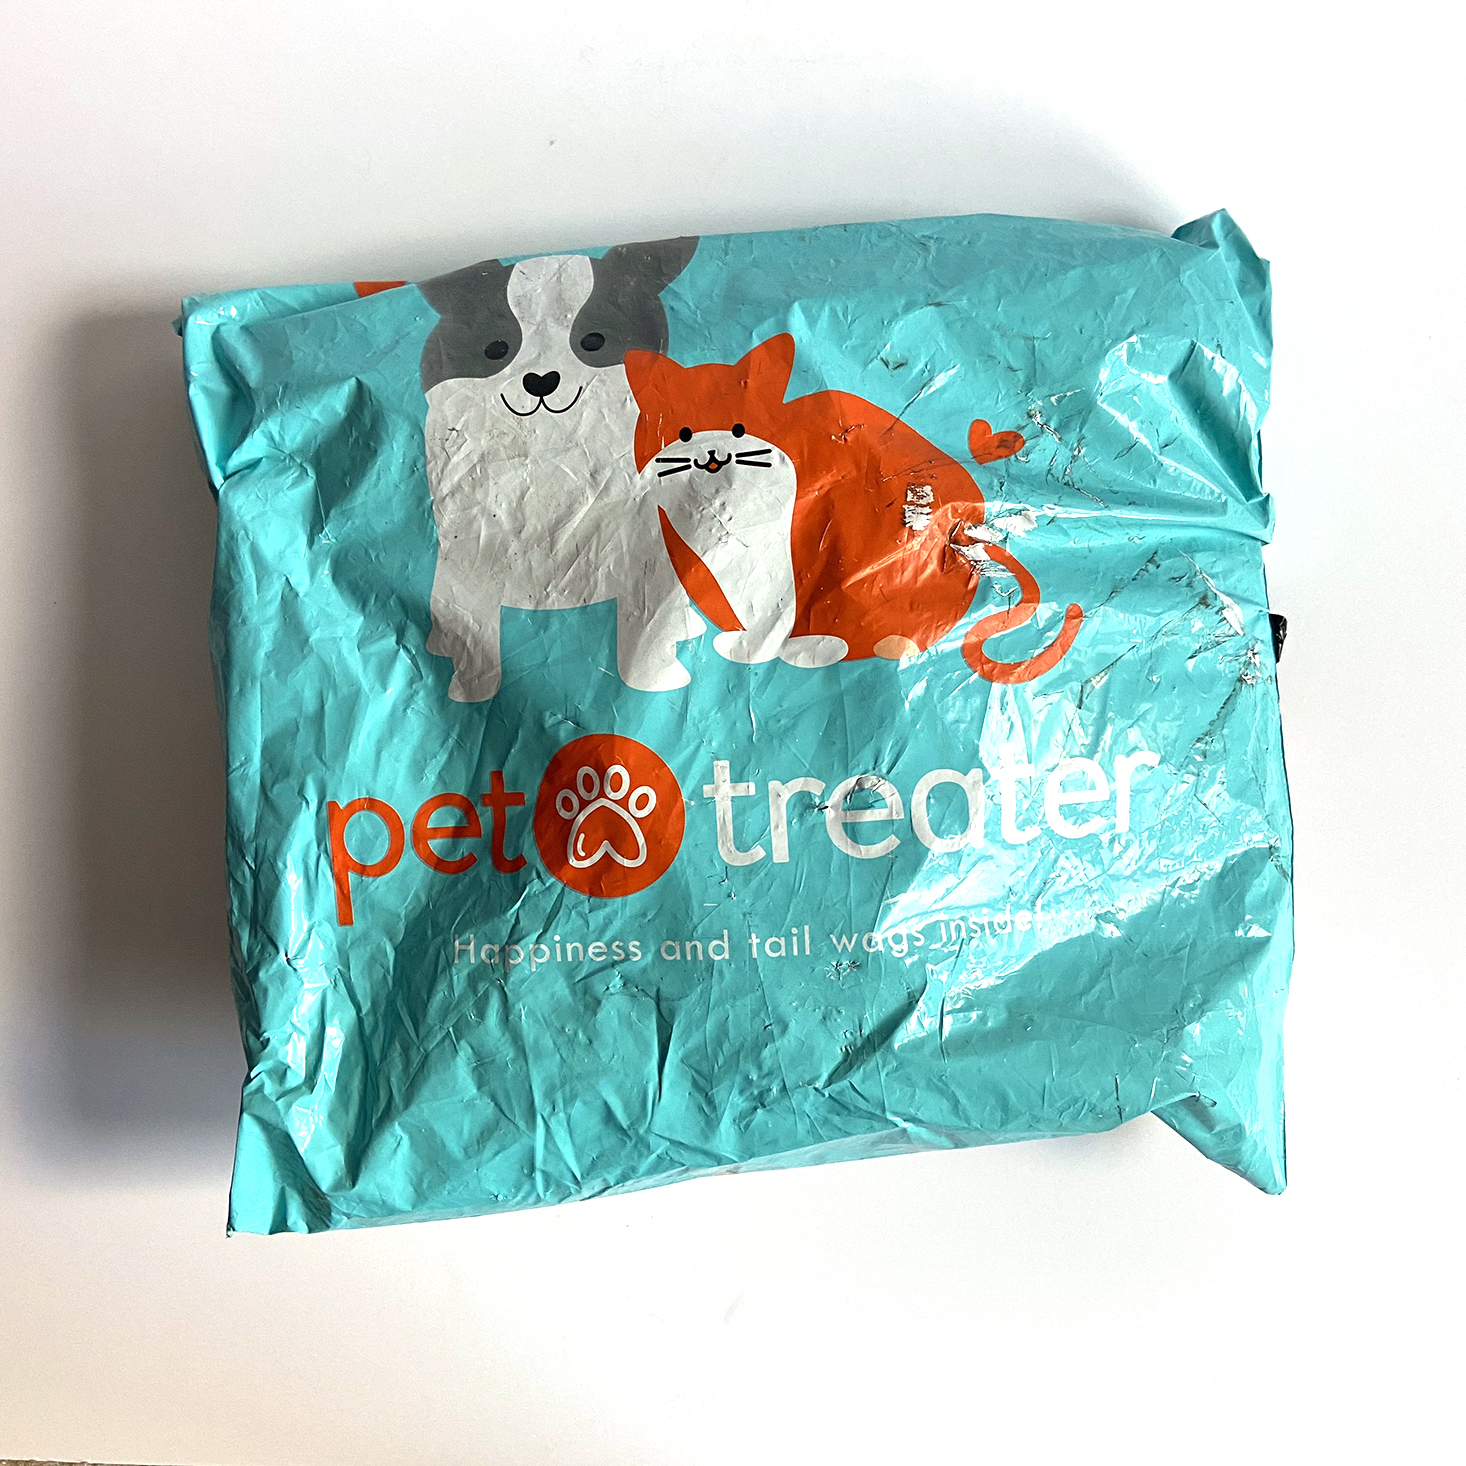 Pet Treater Dog Pack Subscription Review – February 2021